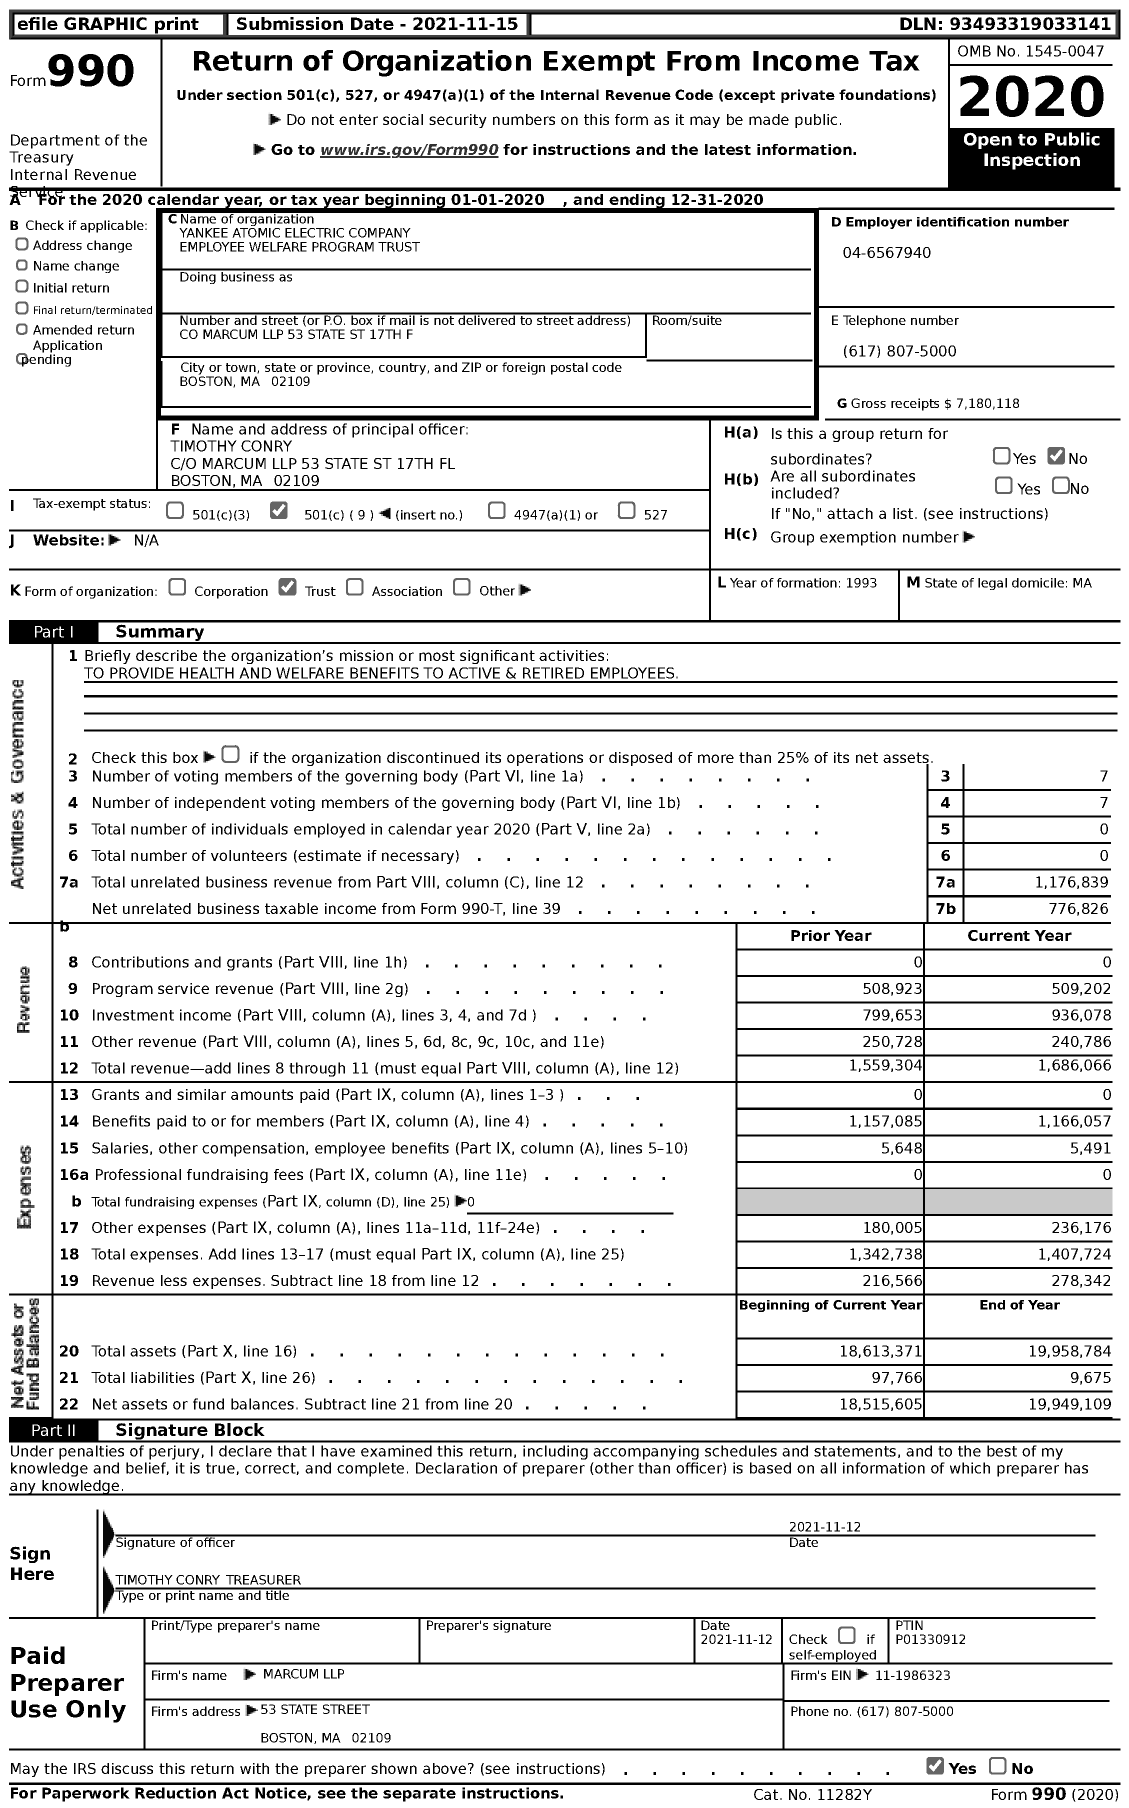 Image of first page of 2020 Form 990 for Yankee Atomic Electric Company Employee Welfare Program Trust